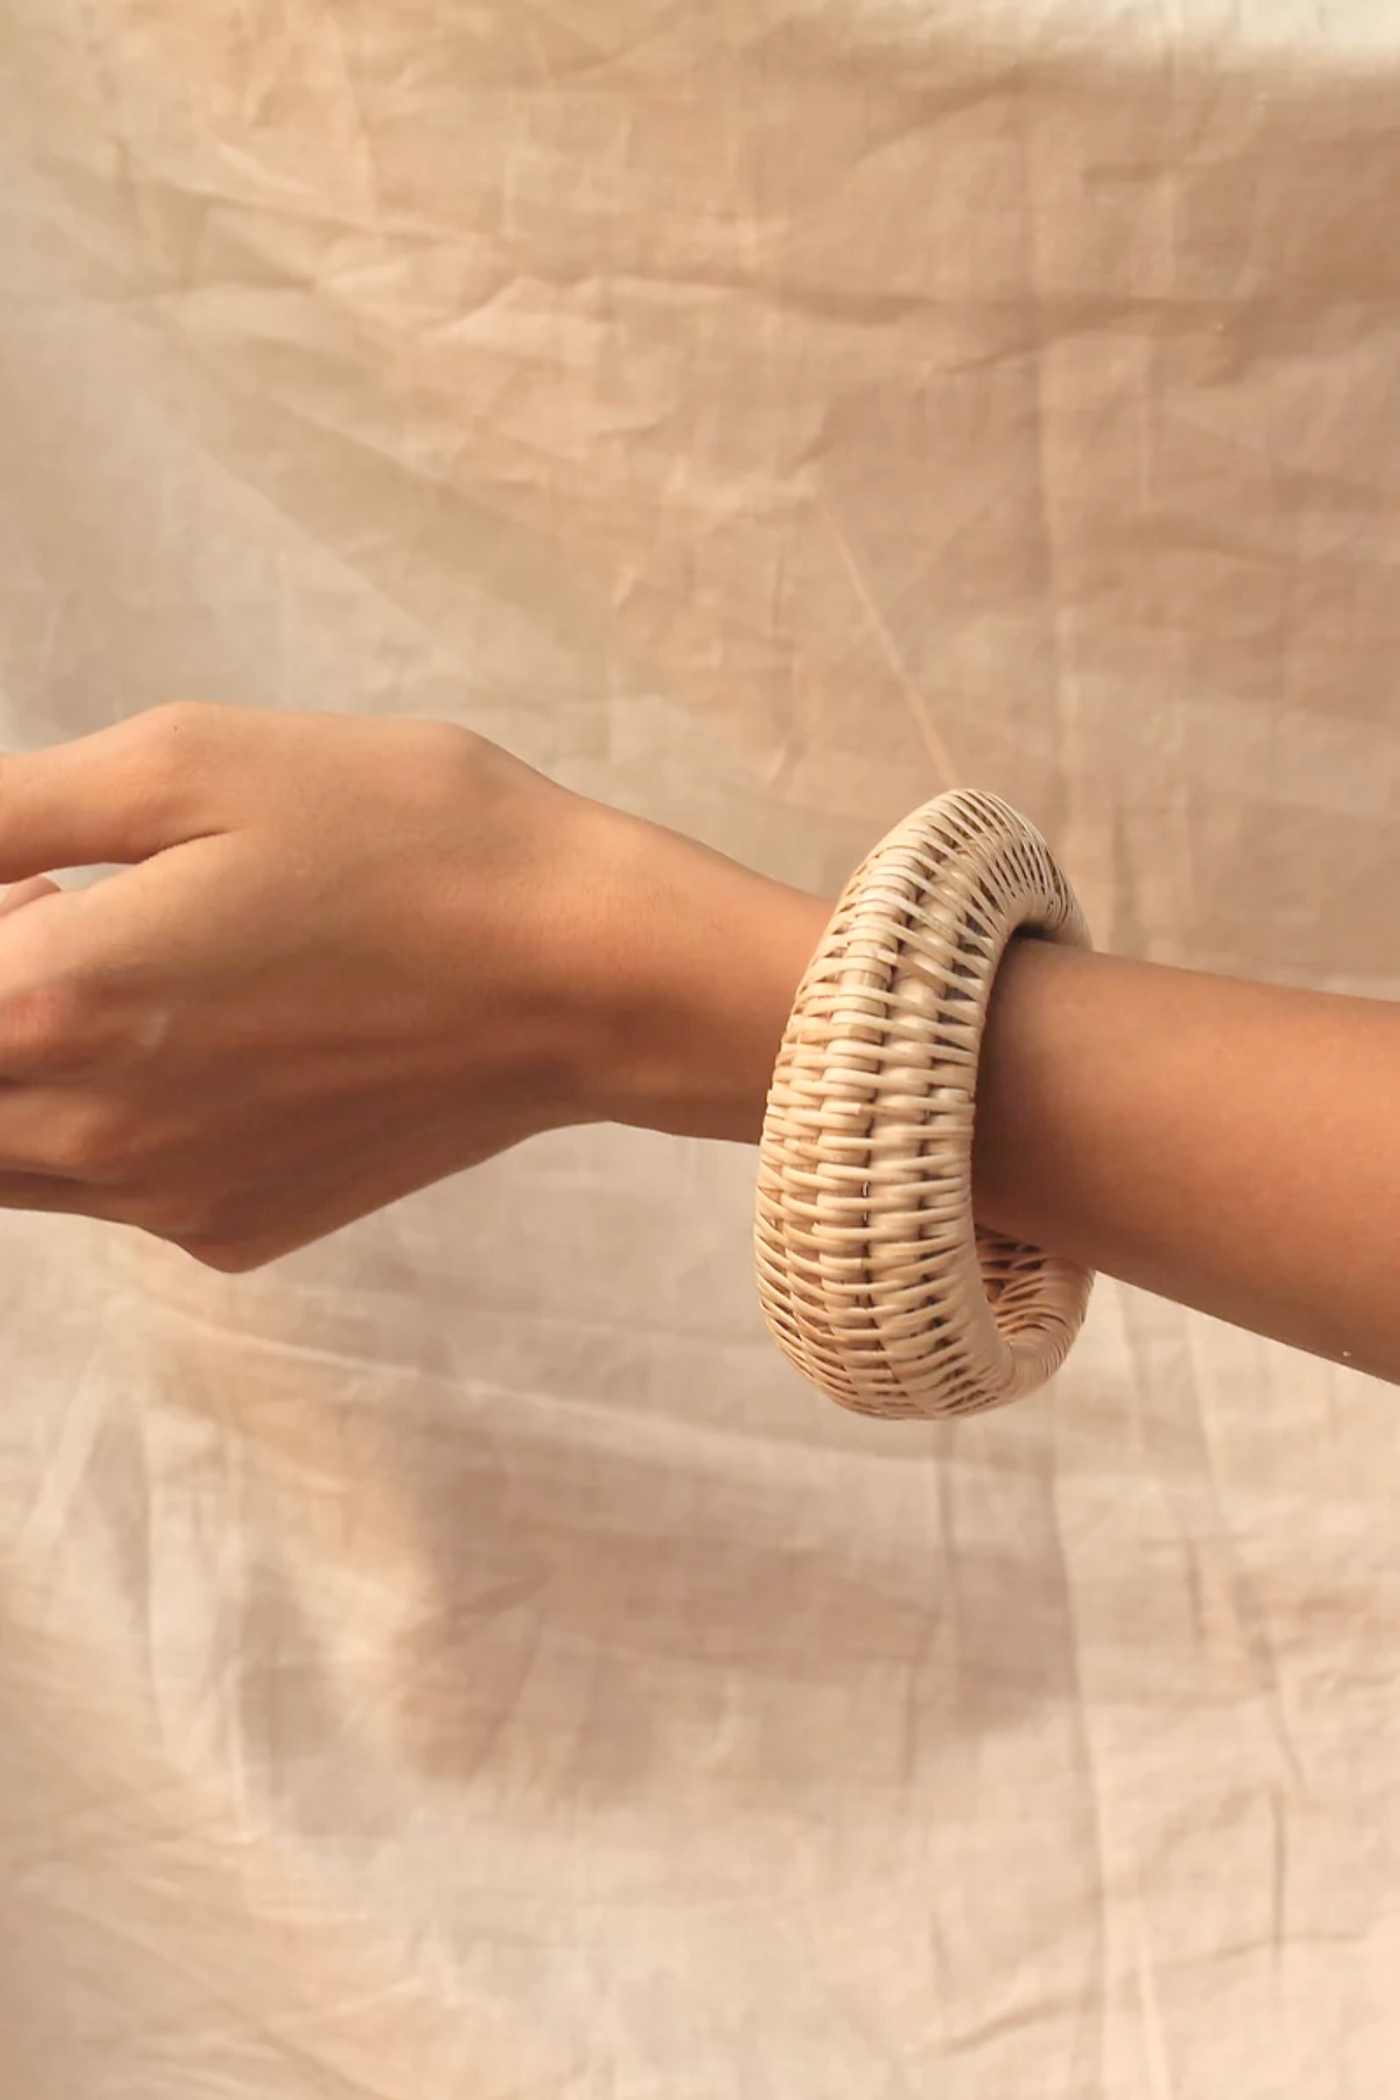 Manava Dawn Bangle in Medium, available on ZERRIN  with free Singapore shipping